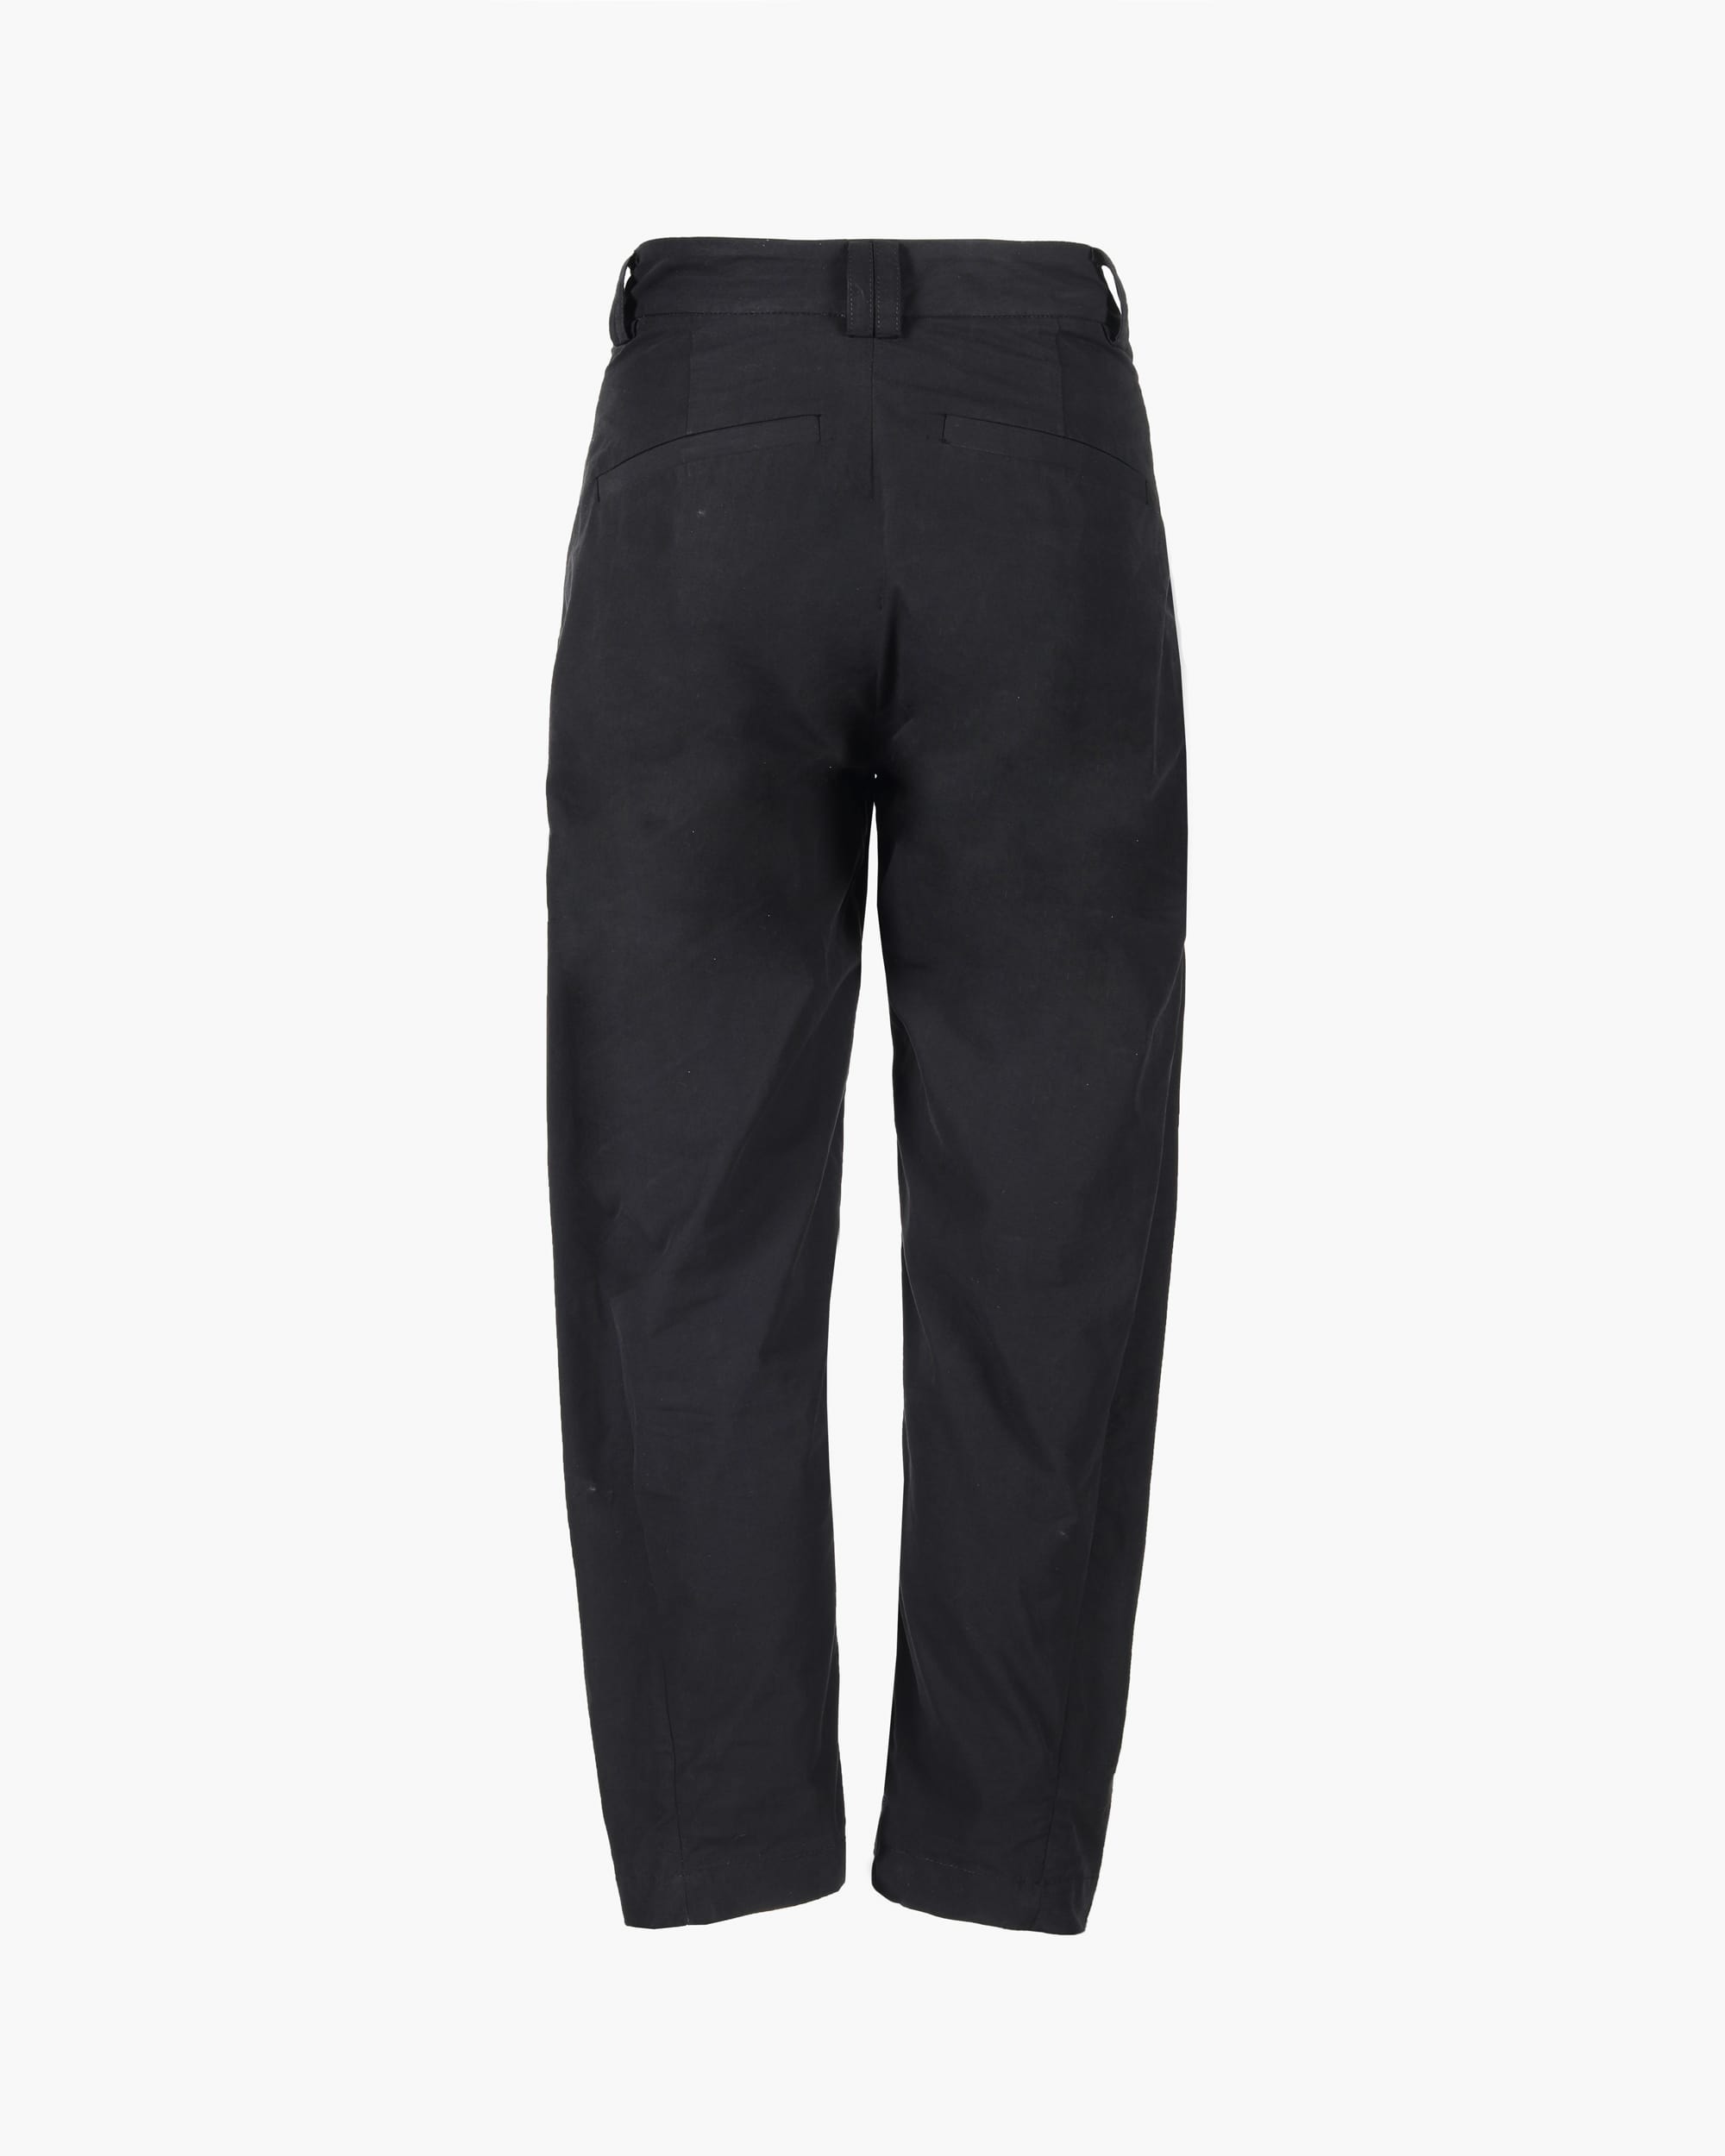 ROSEN Khando Trousers in Cotton Broadcloth